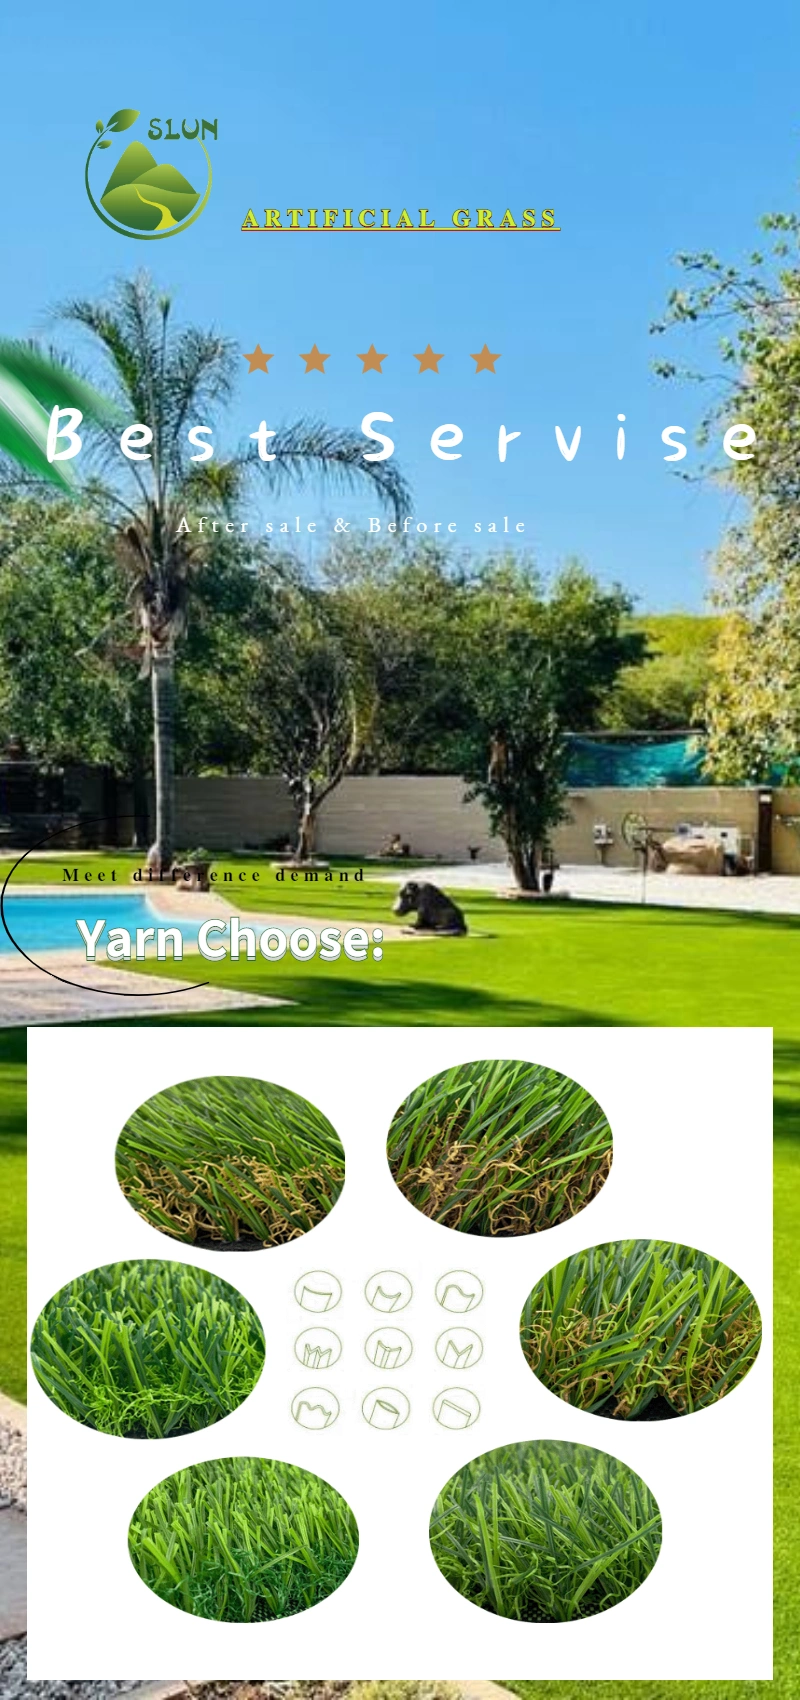 Factory Wholesale Price Pet Friendly Fake Grass Artificial Grass for Terrace, Veranda Fire Resistant and Durable